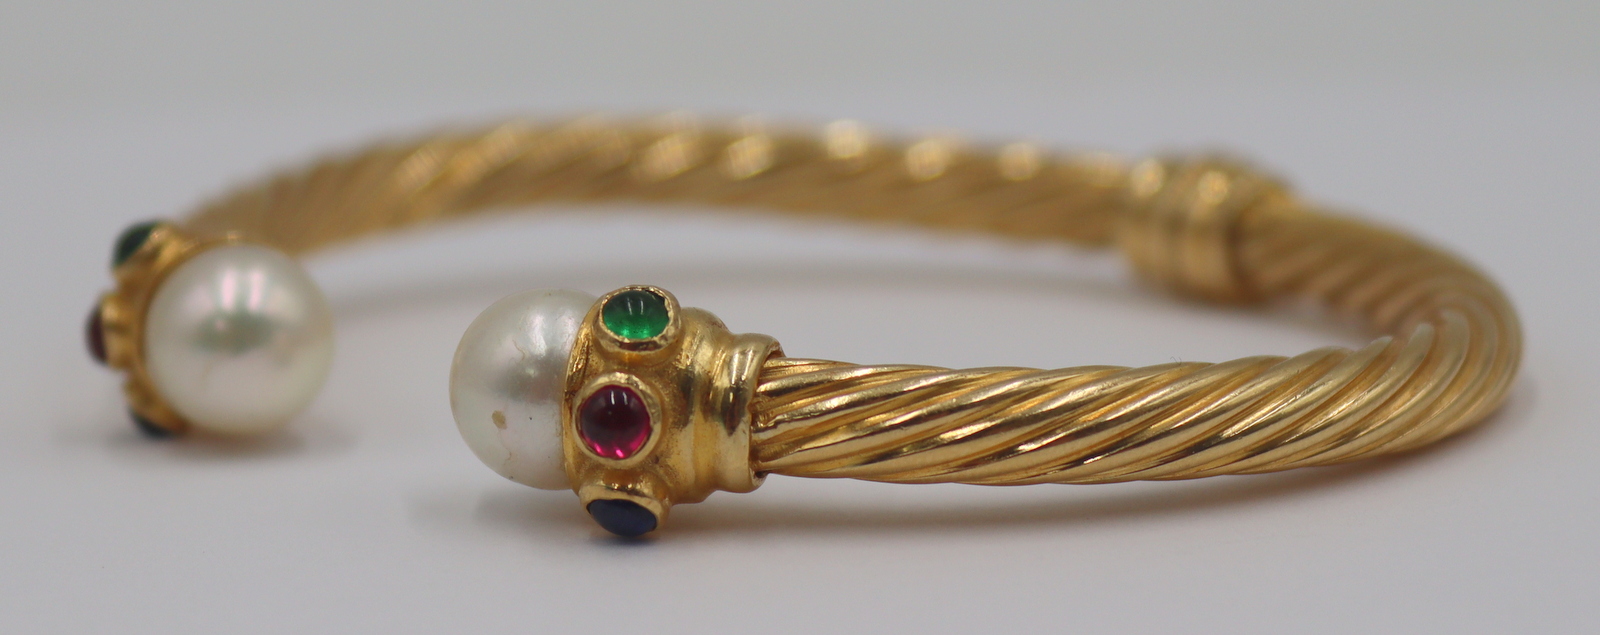 JEWELRY. 18KT GOLD, COLORED GEM